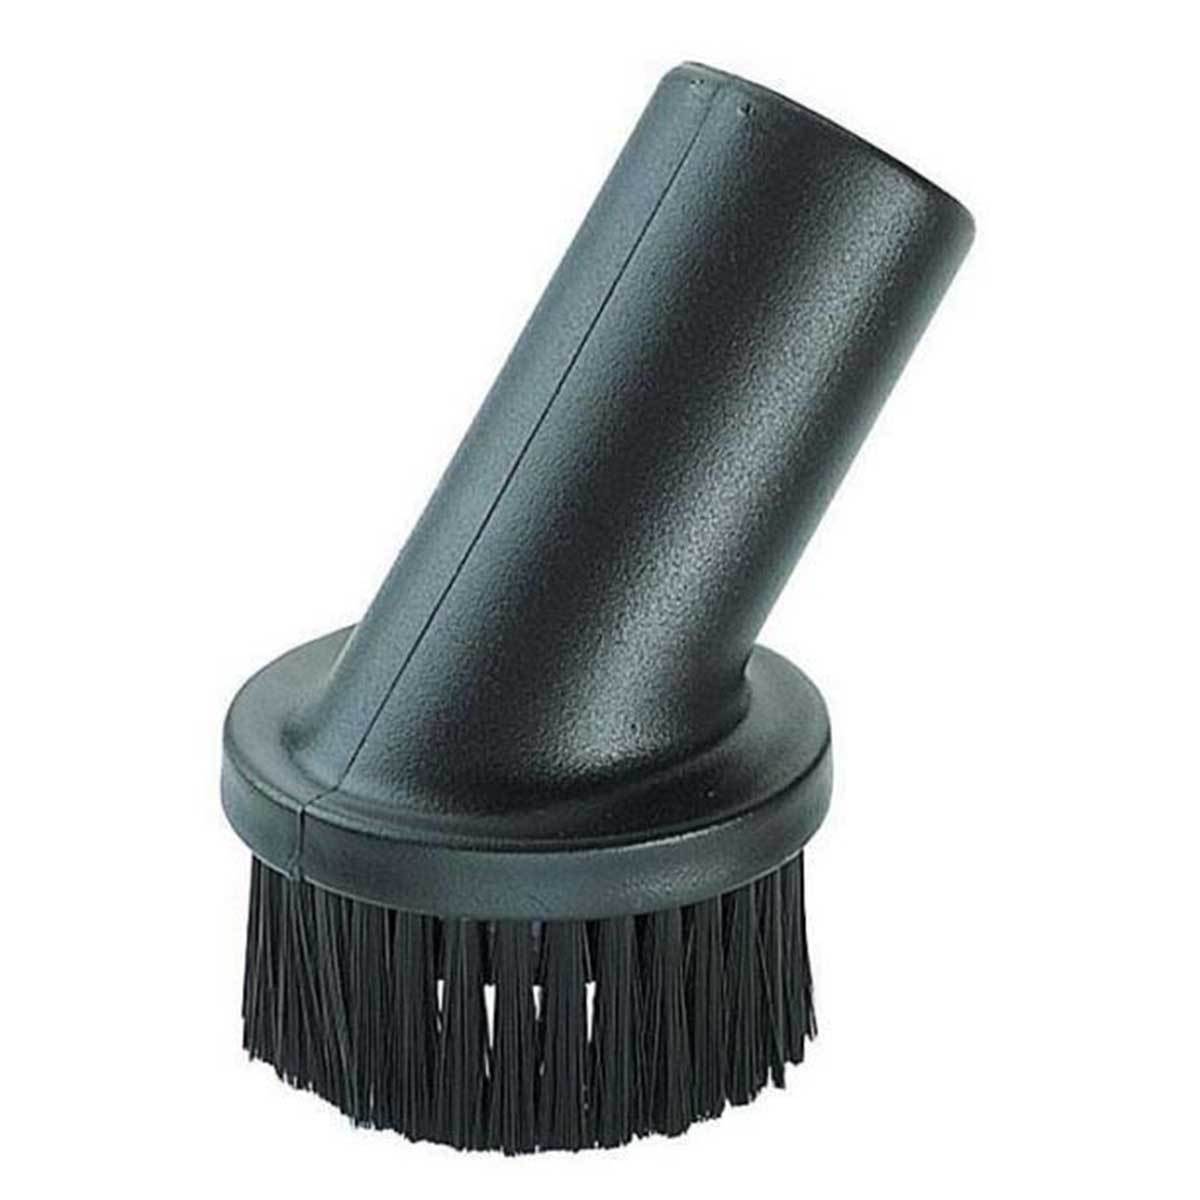 Plastic Brushes and Nozzles for D 27 and D 36 Hoses